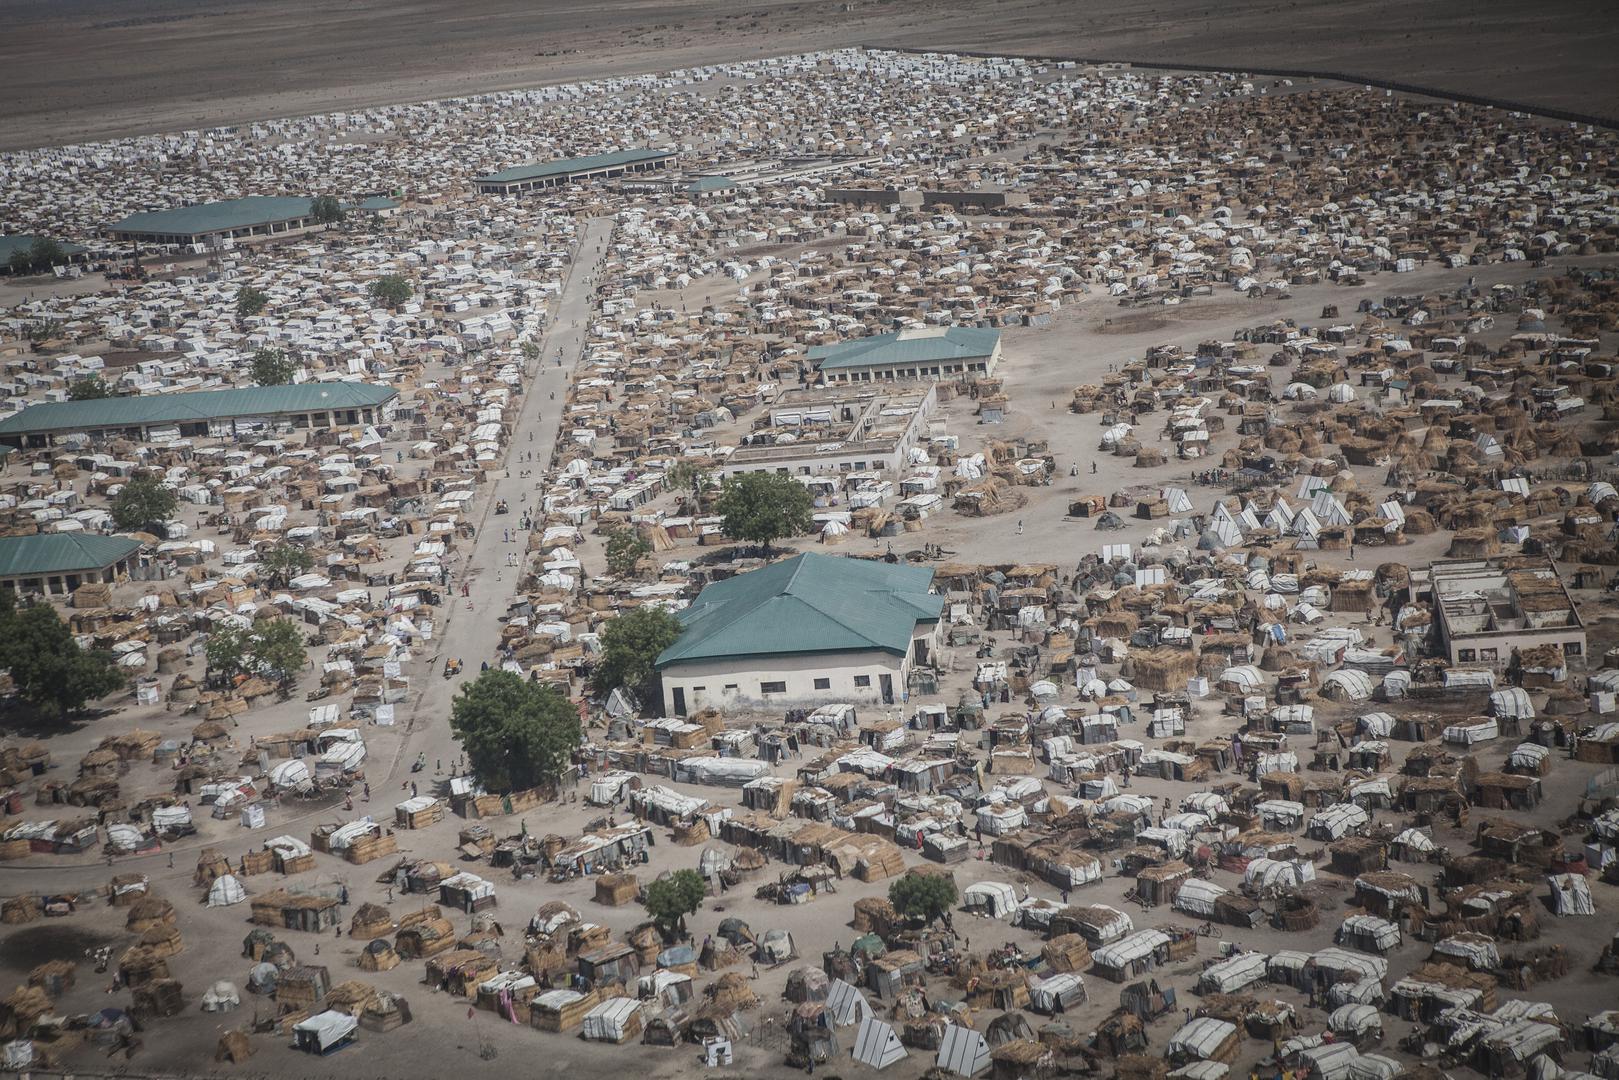 The congested Ngala camp for internally displaced persons in Borno State, northeast Nigeria, where a Boko Haram attack in early September killed at least seven people, April 2017.